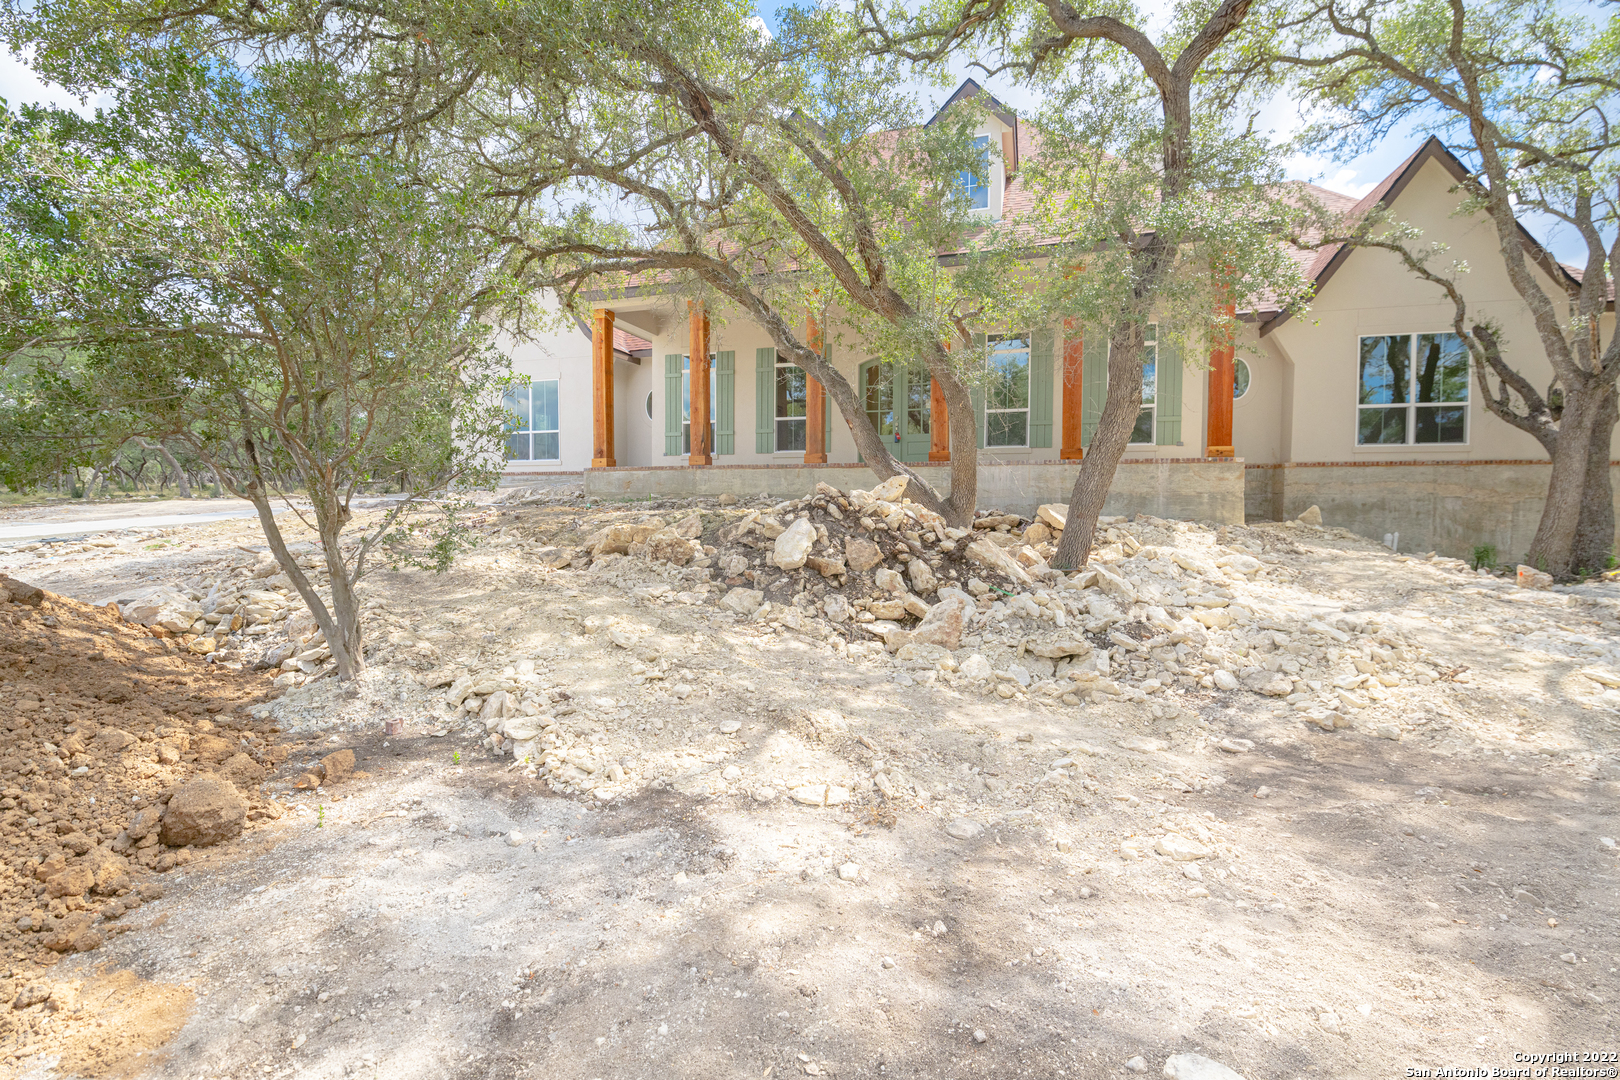 MOTIVATED SELLER!! Builder will also include a new Stainless Steel Dacor 42" French Door Refrigerator with 5 year warranty($12,000.00 value!) This spectacular Anderson Preiss custom home is complete in the beautiful Texas Hill Country. This home is conveniently located between San Antonio, Austin and New Braunfels. It has 3273 square feet that is extremely functional and well thought out. Four large bedrooms with 3.5 bathrooms as well as a 3 car garage. The homes floor plan makes beautiful use of the numerous live oak trees that are on the 1.1 acre lot. Large brick lined back porch complete with a fireplace for fall and winter entertaining! Expansive, open concept kitchen for year round entertaining as well. This one is ready so don't miss out!